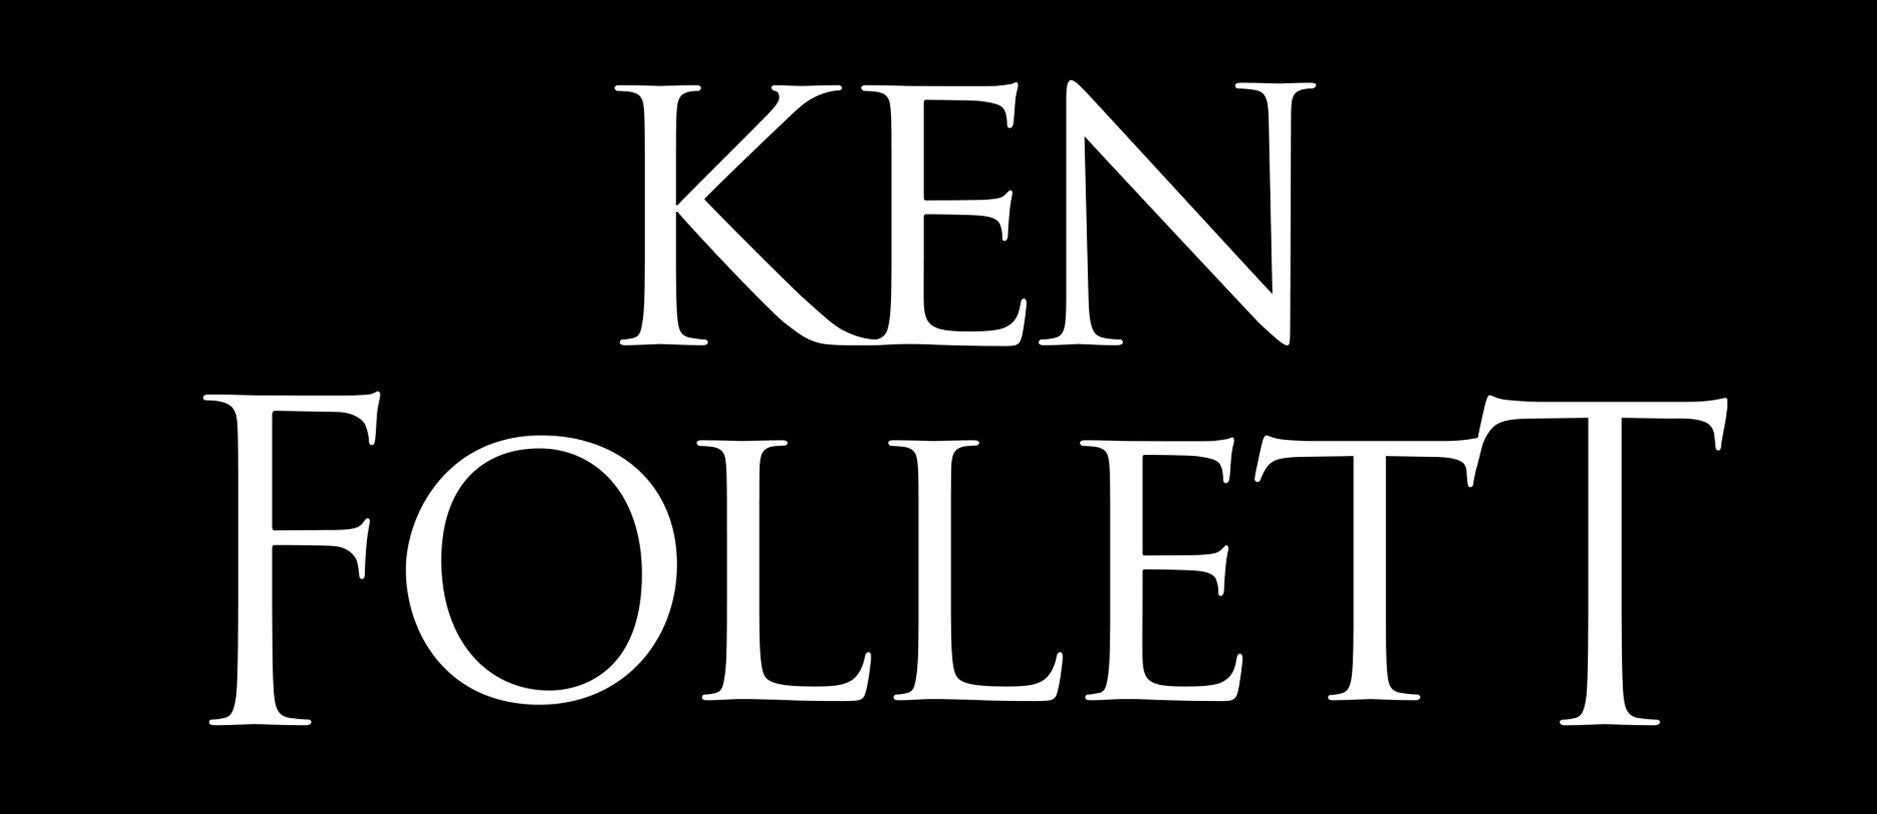 Surprise New Thriller by Ken Follett is Coming This November!